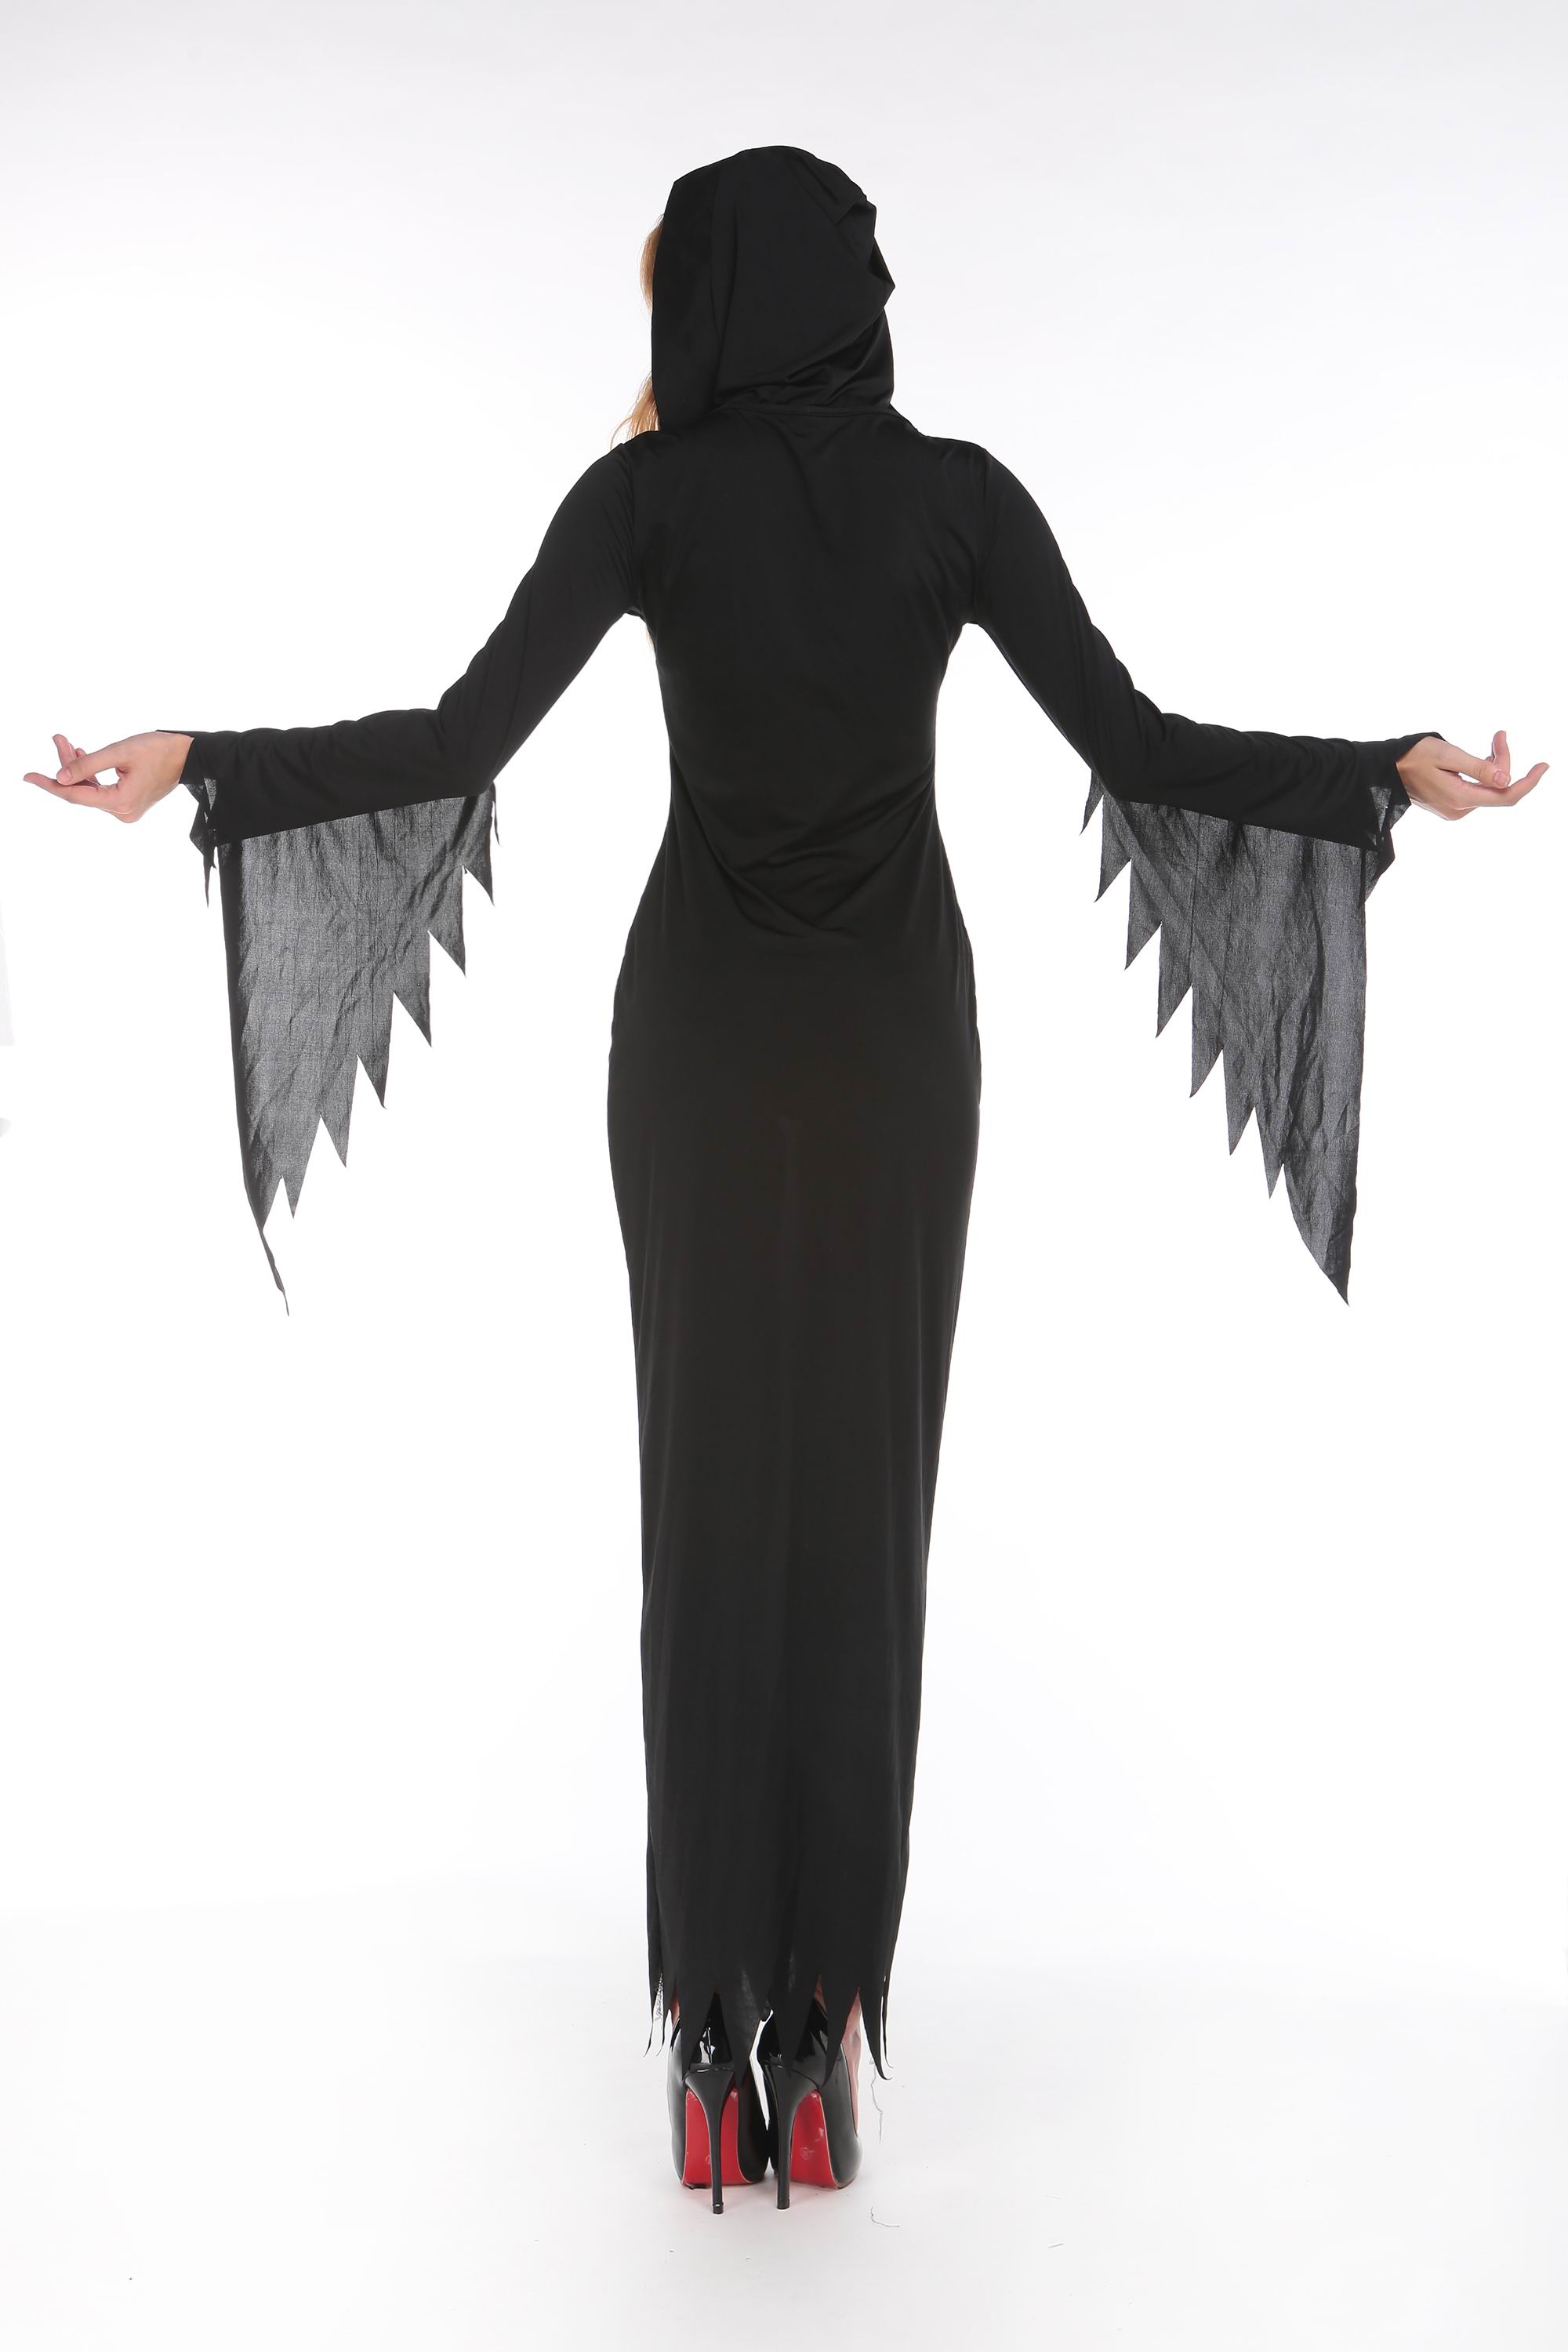 F66175 Black Hooded Robe Witch Costume